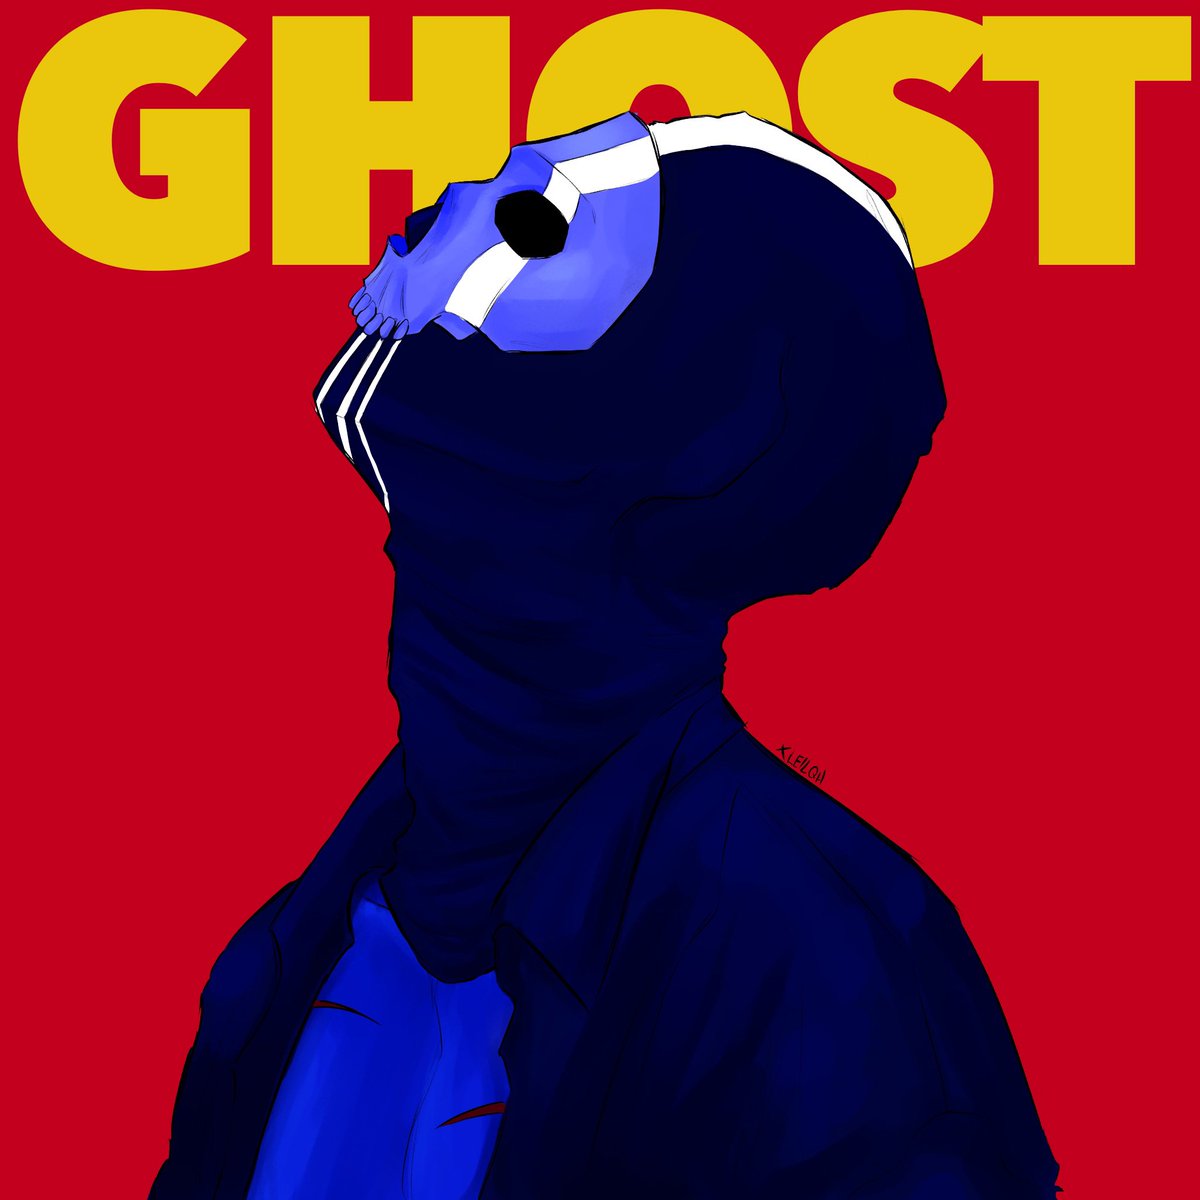 ghost but it’s the starboy album cover?!

#ghost #ghostcod #CallofDuty